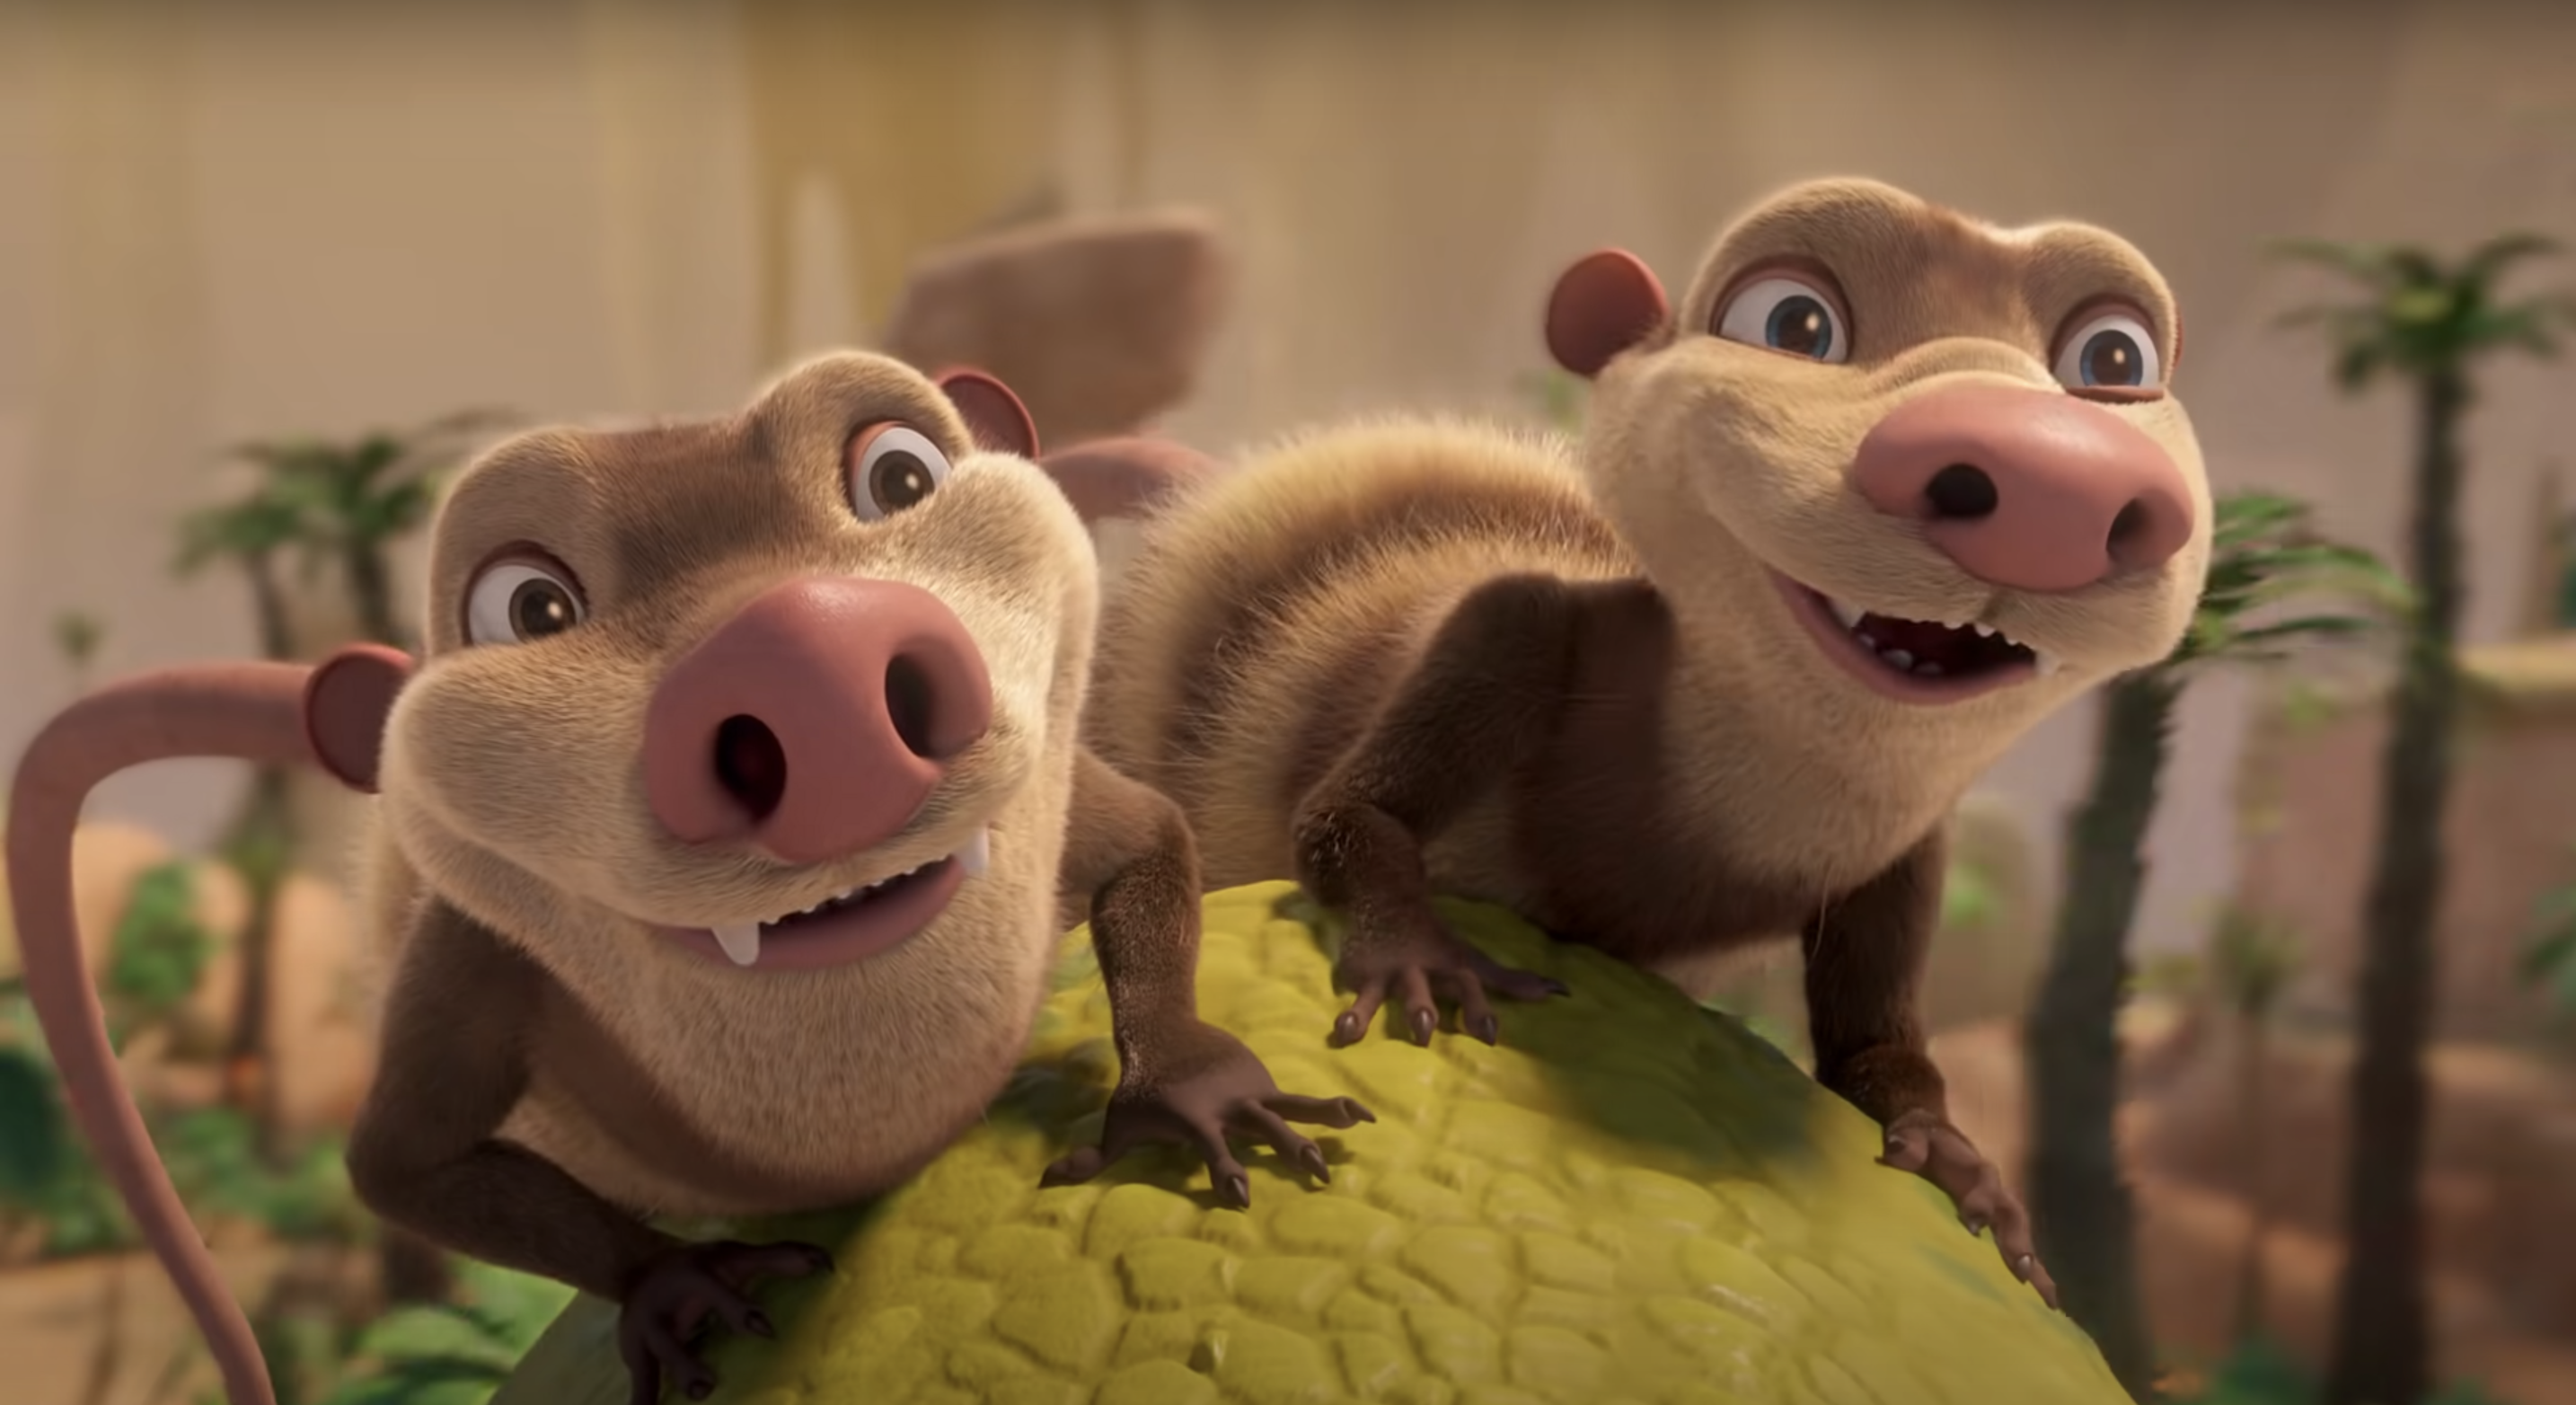 Get buck wild about the new “Ice Age” movie